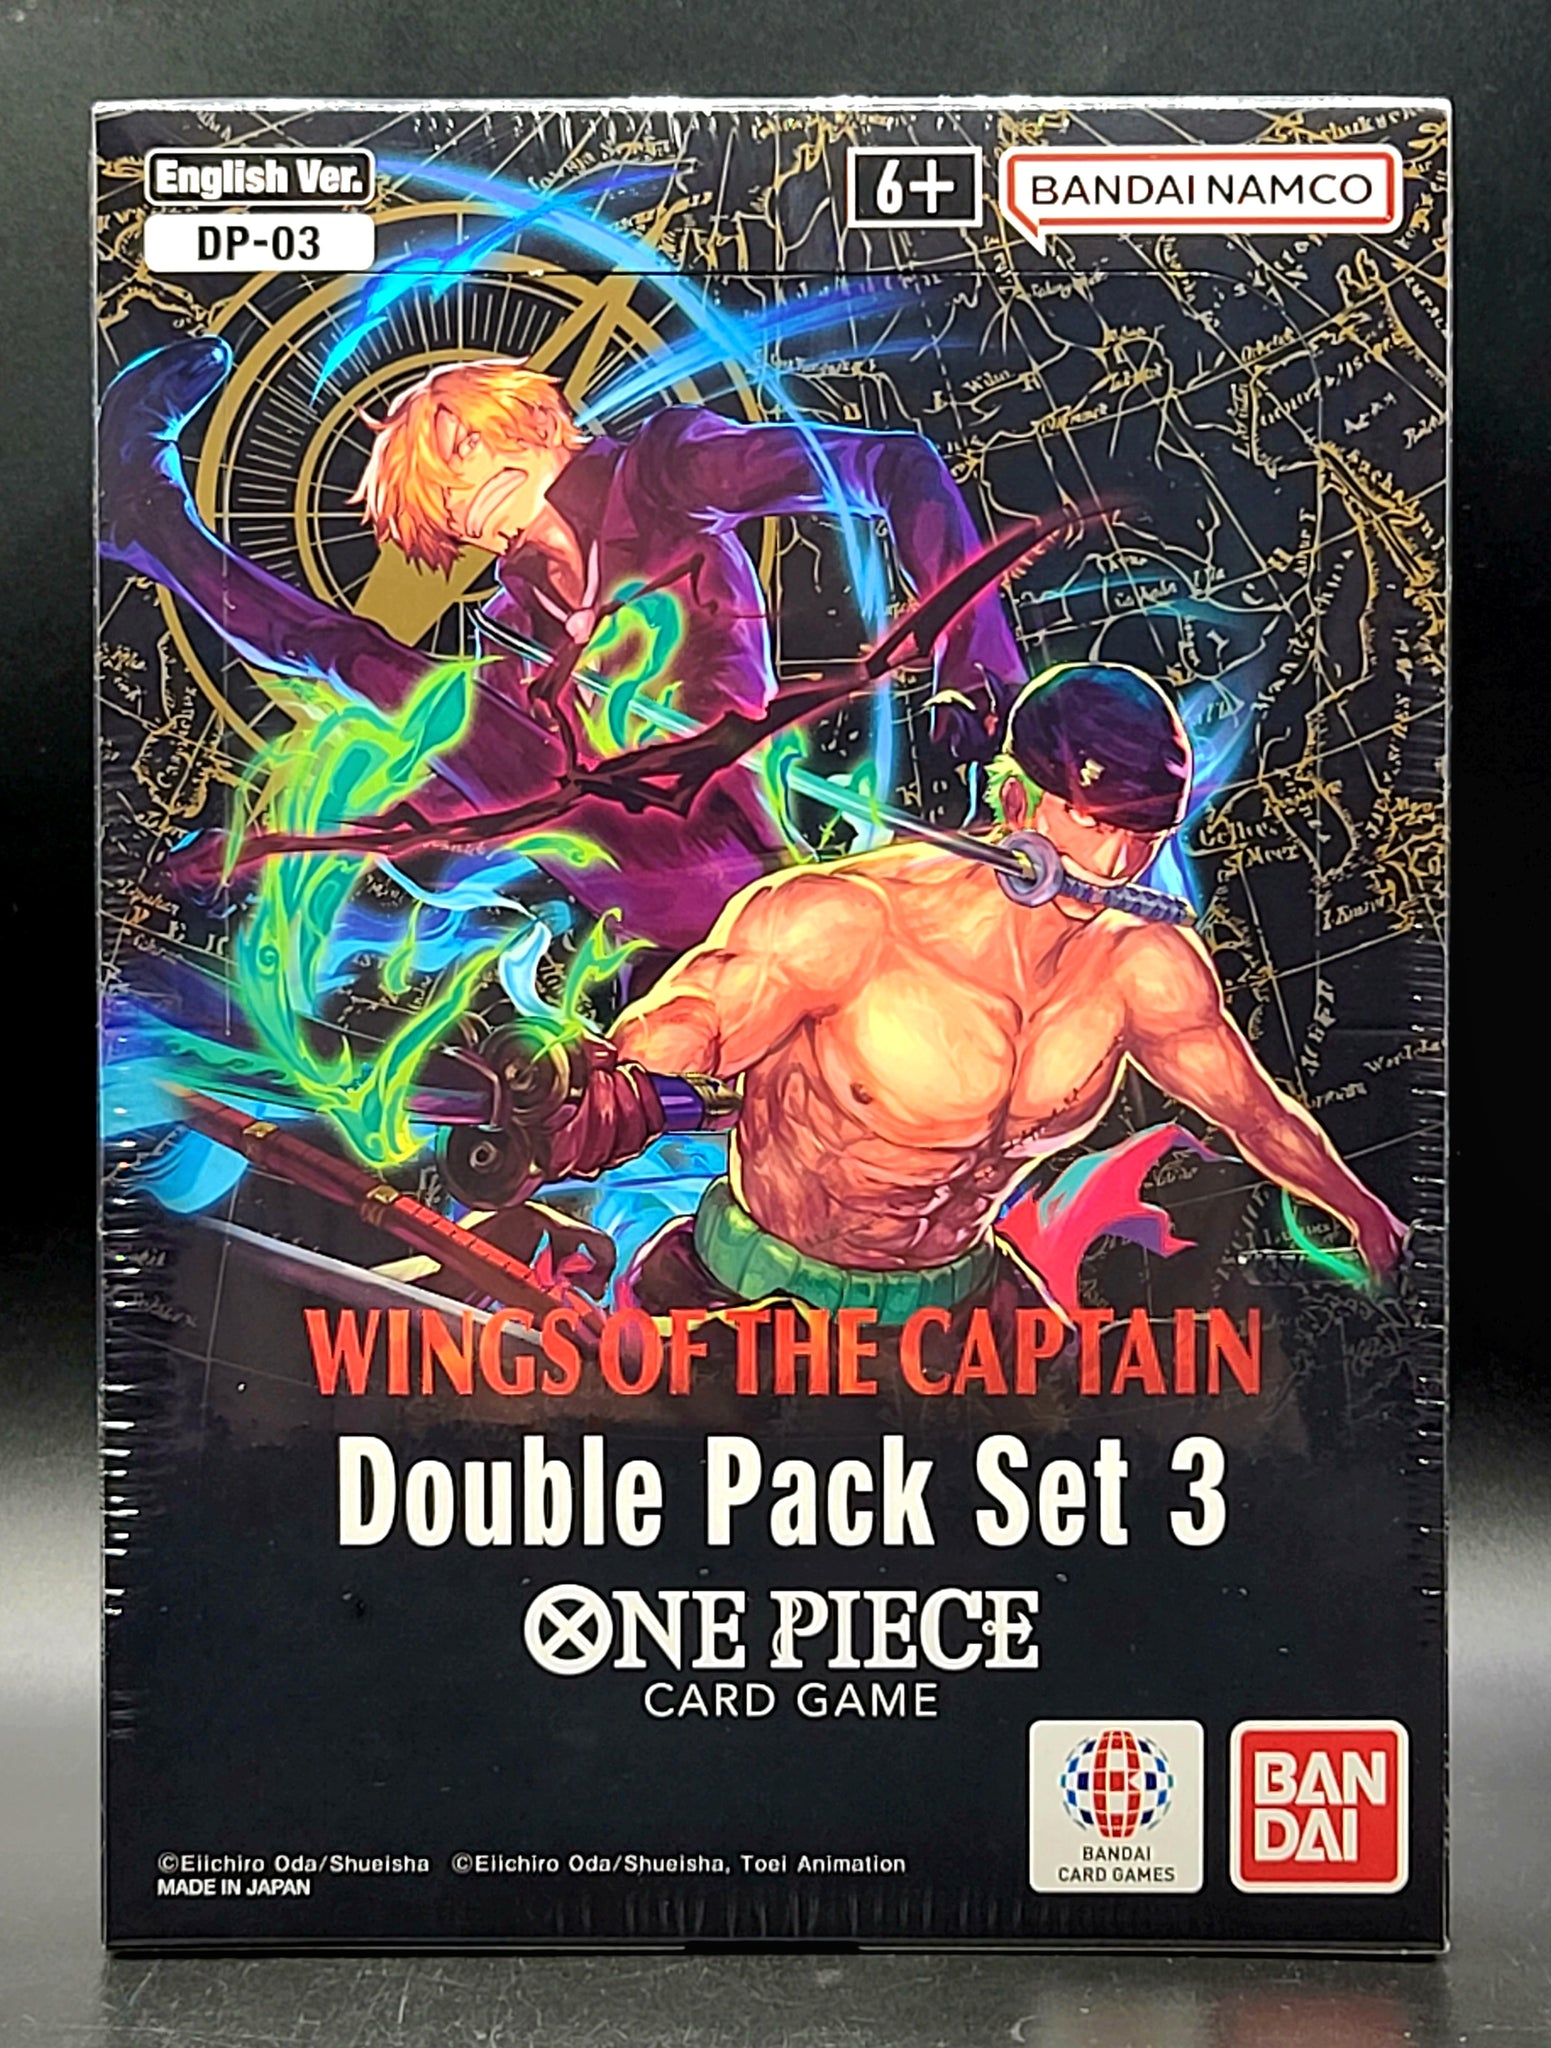 One Piece Double Pack Set Volume 3 - Wings of the Captain